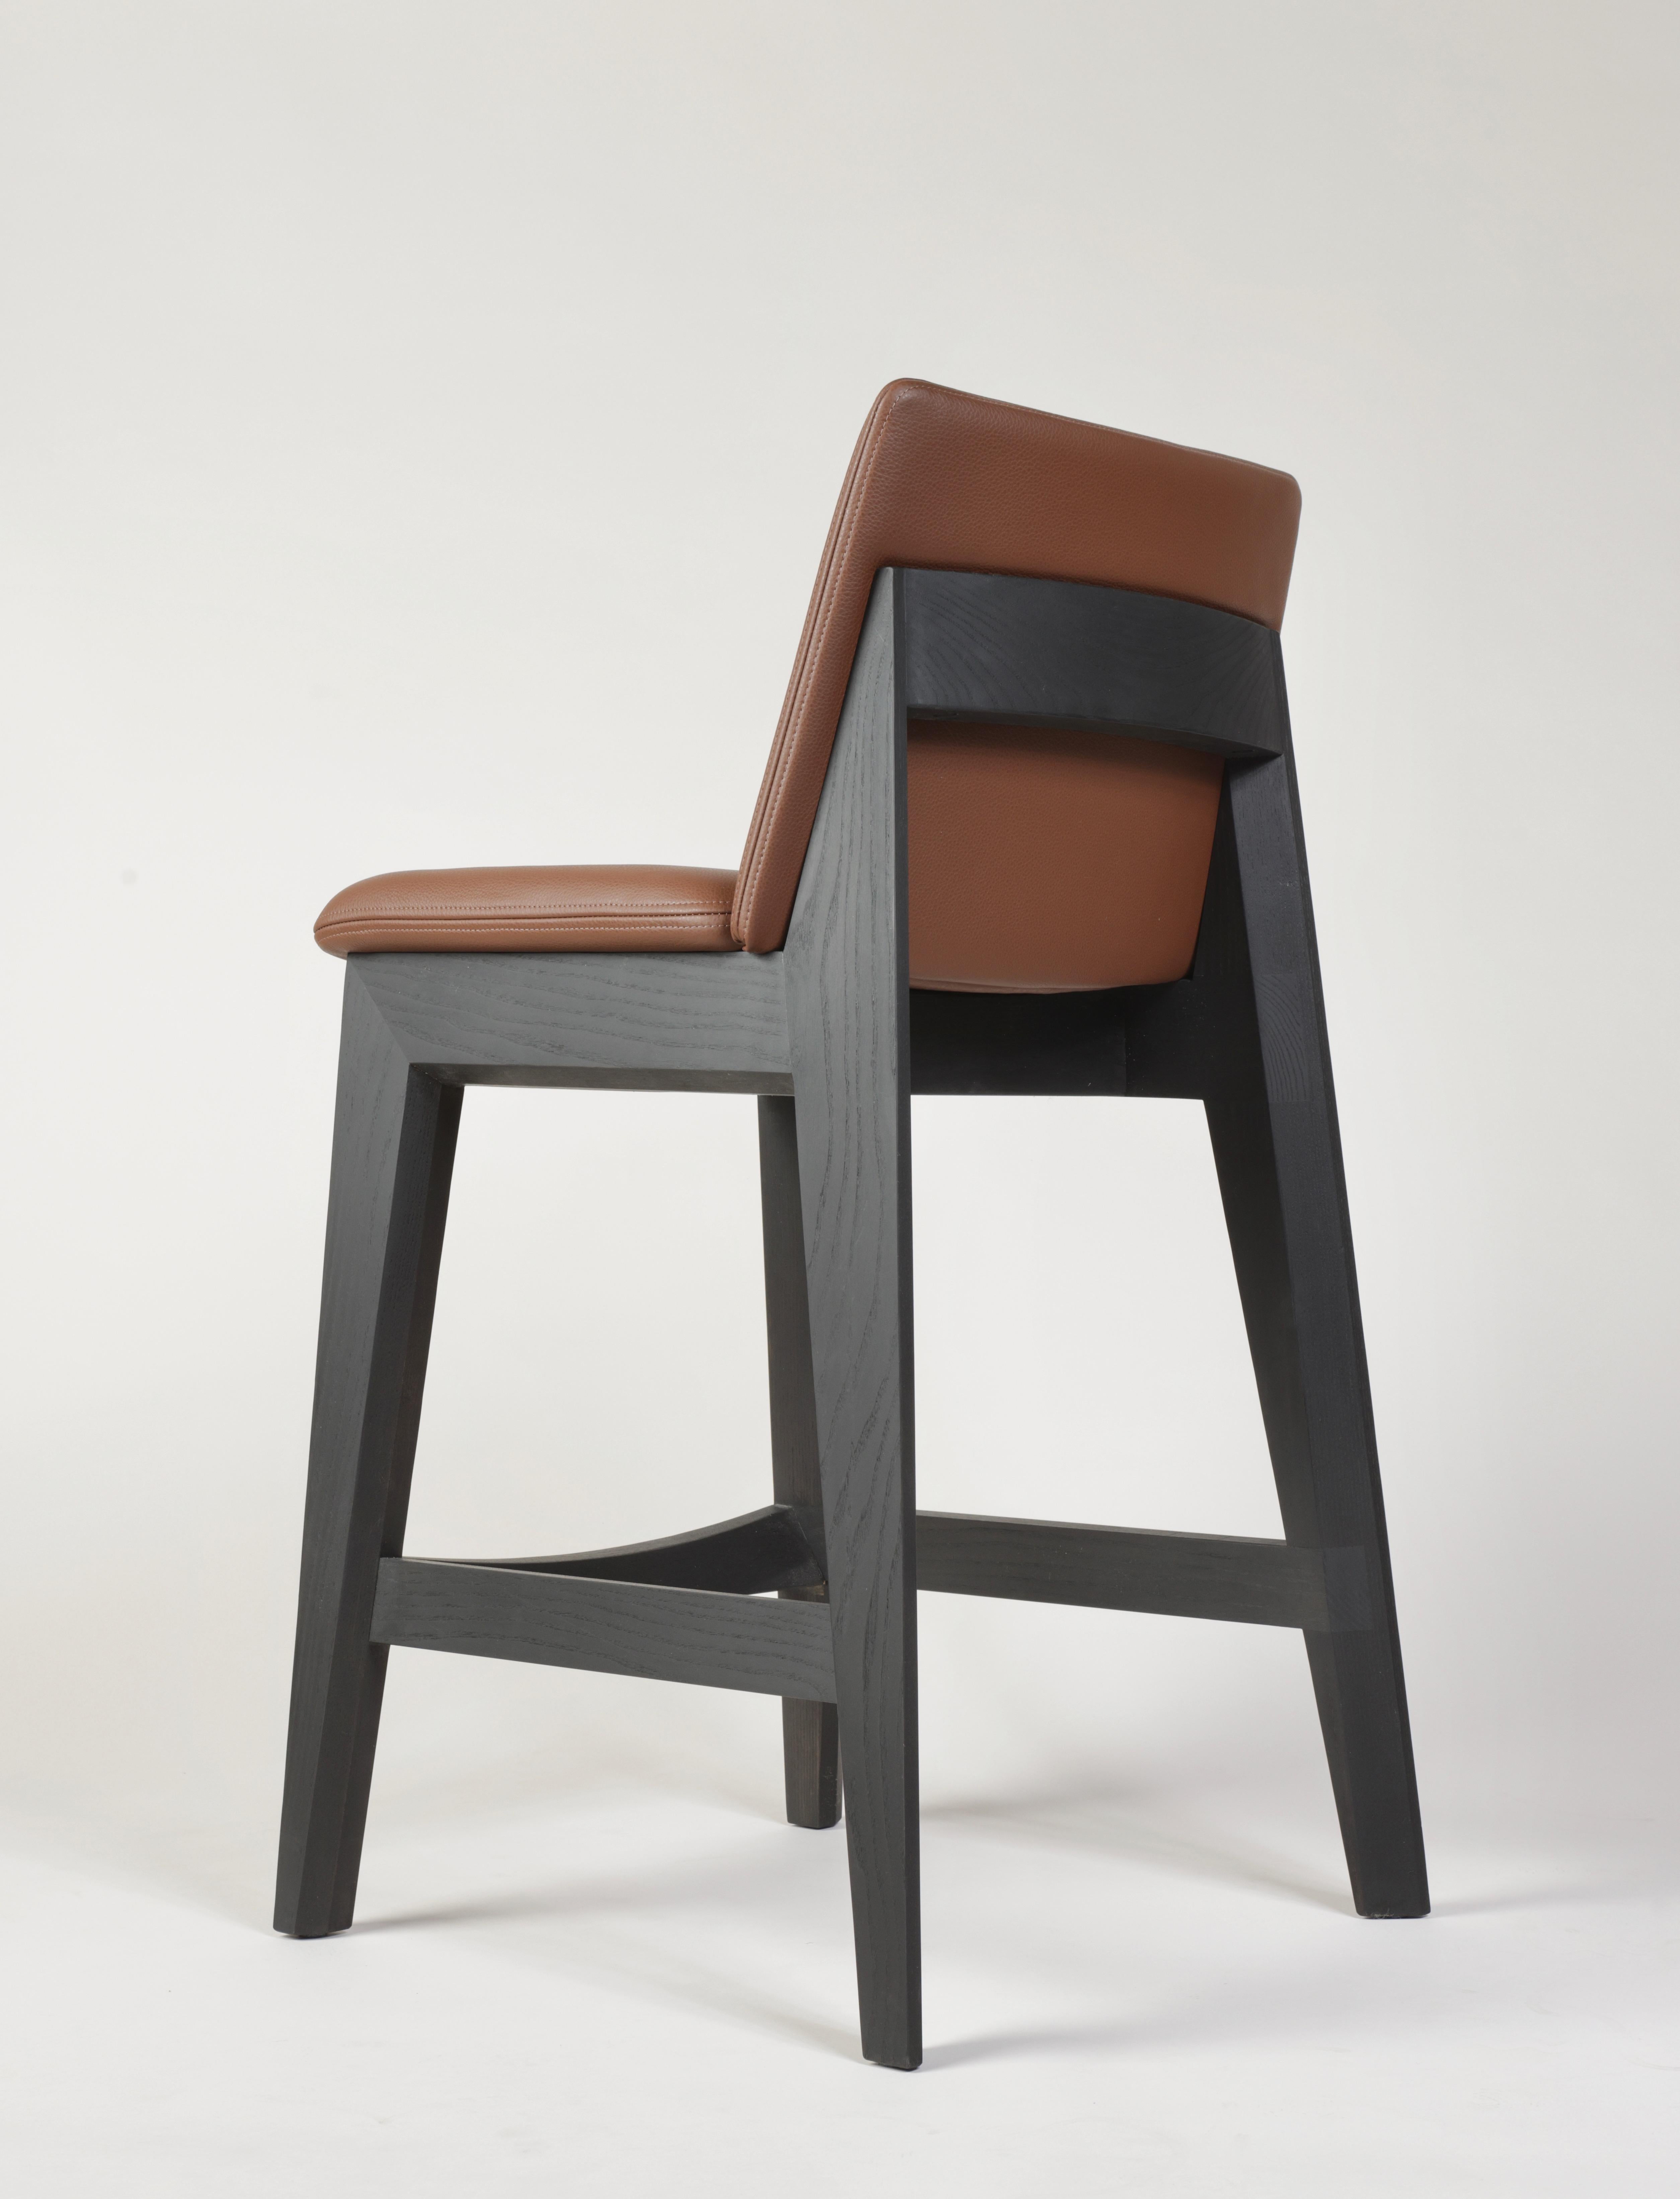 Kroft counter stool shown in solid Blackened Ash & pebble grain leather upholstery. A contemporary stool with a smaller footprint and ample comfort. Functional joinery creates visual interest - angled profiles lend an overall lightness to the look.